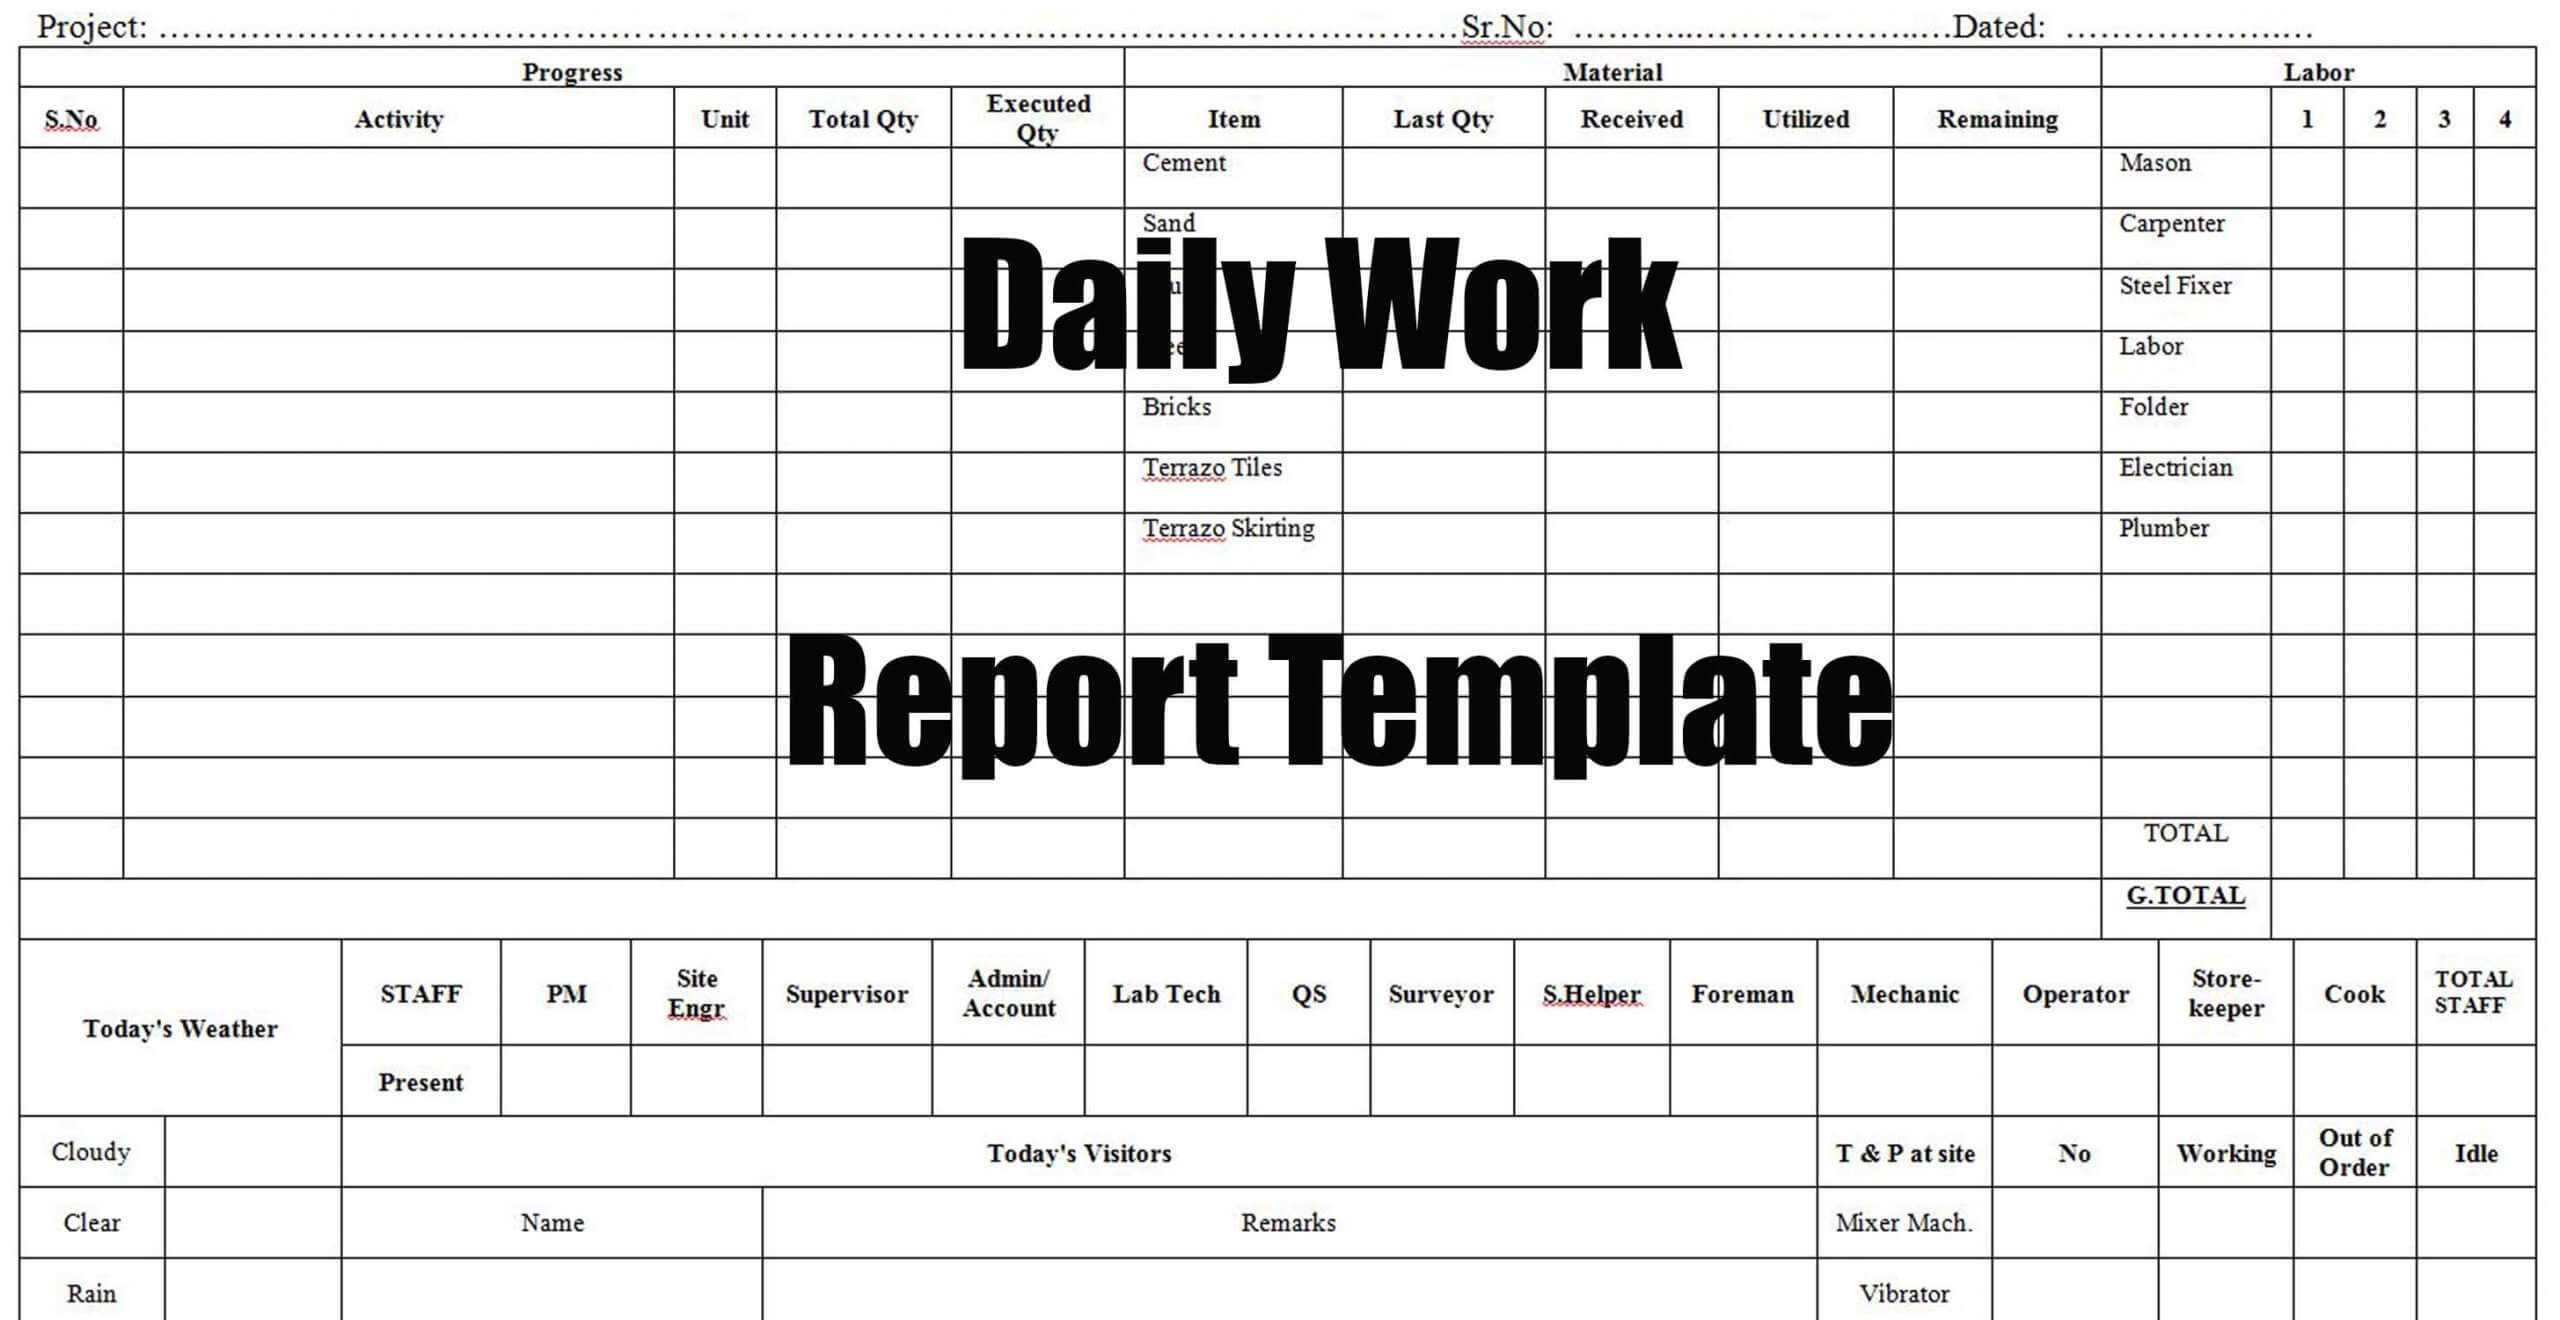 Daily Work Report Template - Engineering Discoveries Pertaining To Daily Work Report Template